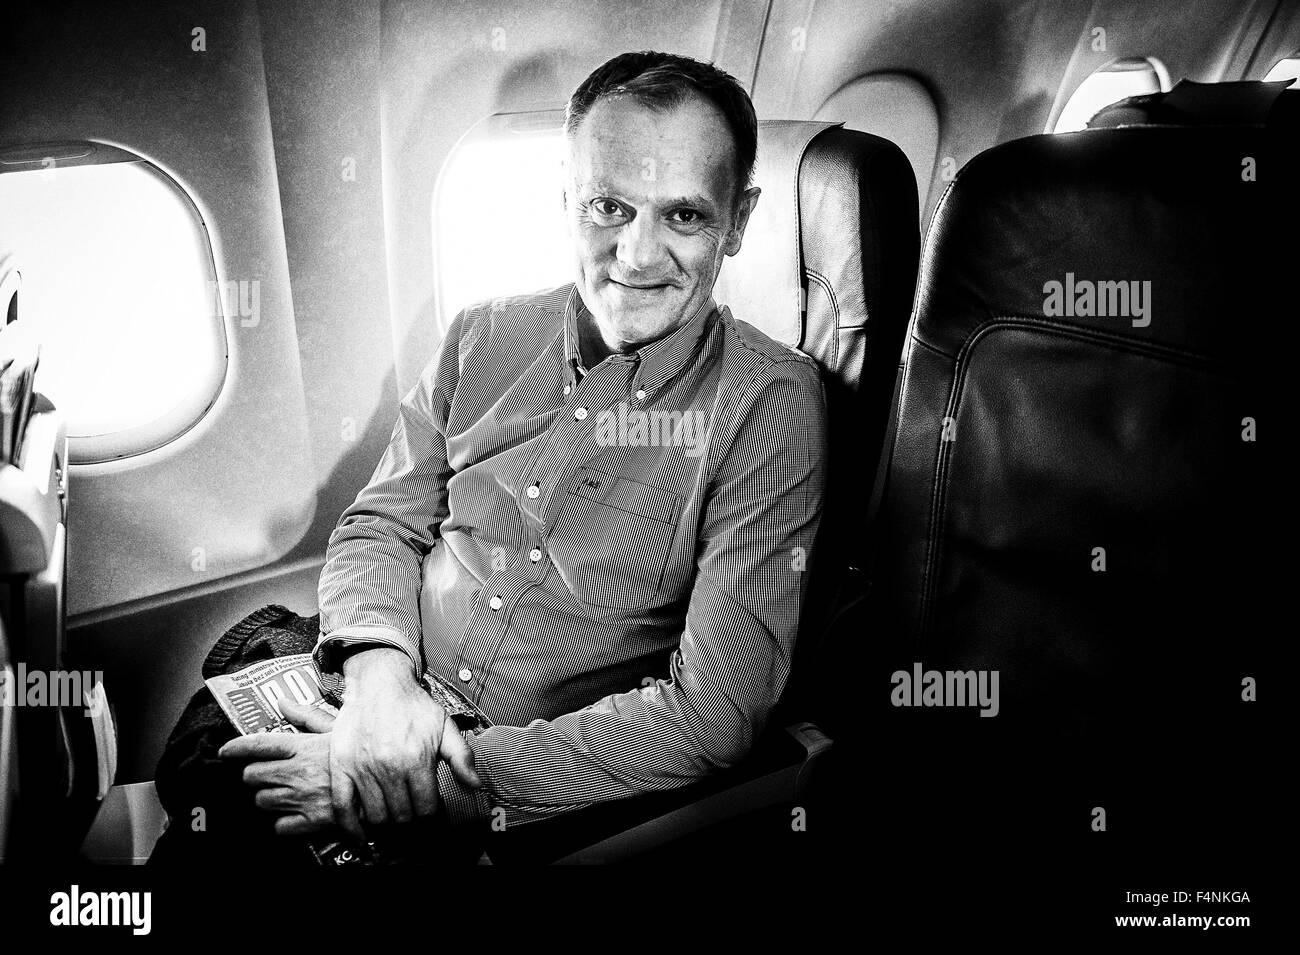 Brussels, Bxl, Belgium. 21st Oct, 2015. Donald Tusk, the president of the European Council at the board of airplane on his way for EPP European People Party in Madrit, Spainon 21.10.2015 by Wiktor Dabkowski Credit:  Wiktor Dabkowski/ZUMA Wire/Alamy Live News Stock Photo